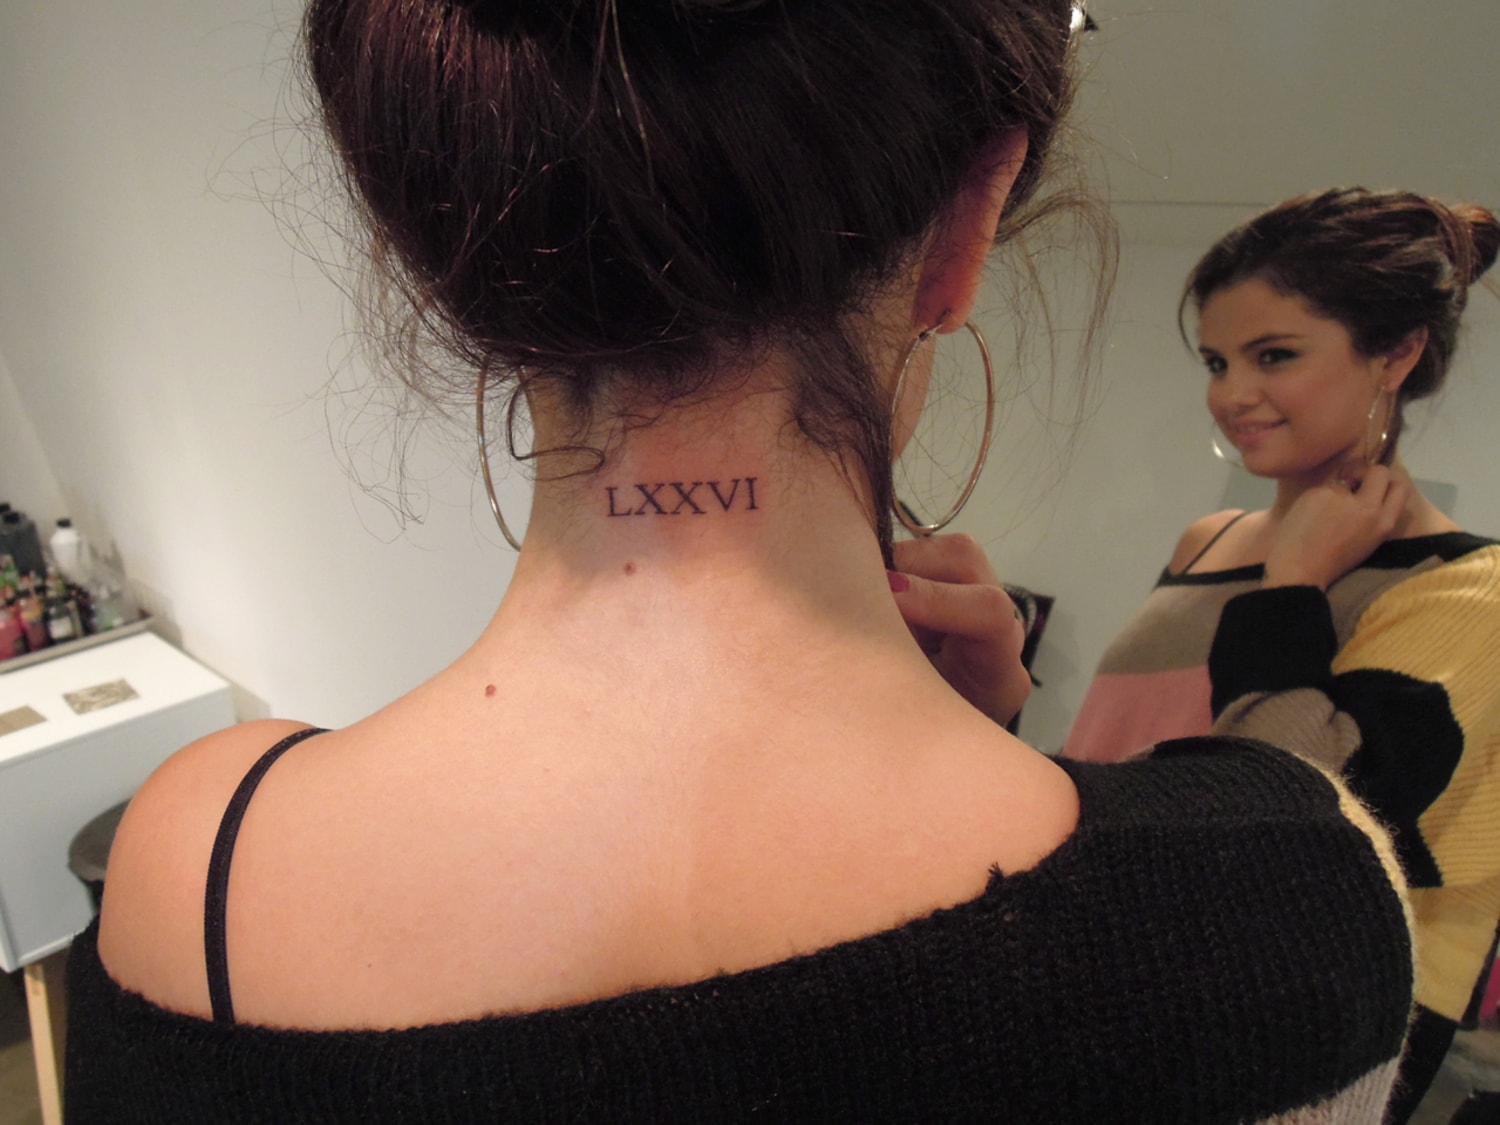 Selena Gomez gets into the spirit of '76 with a neck tattoo